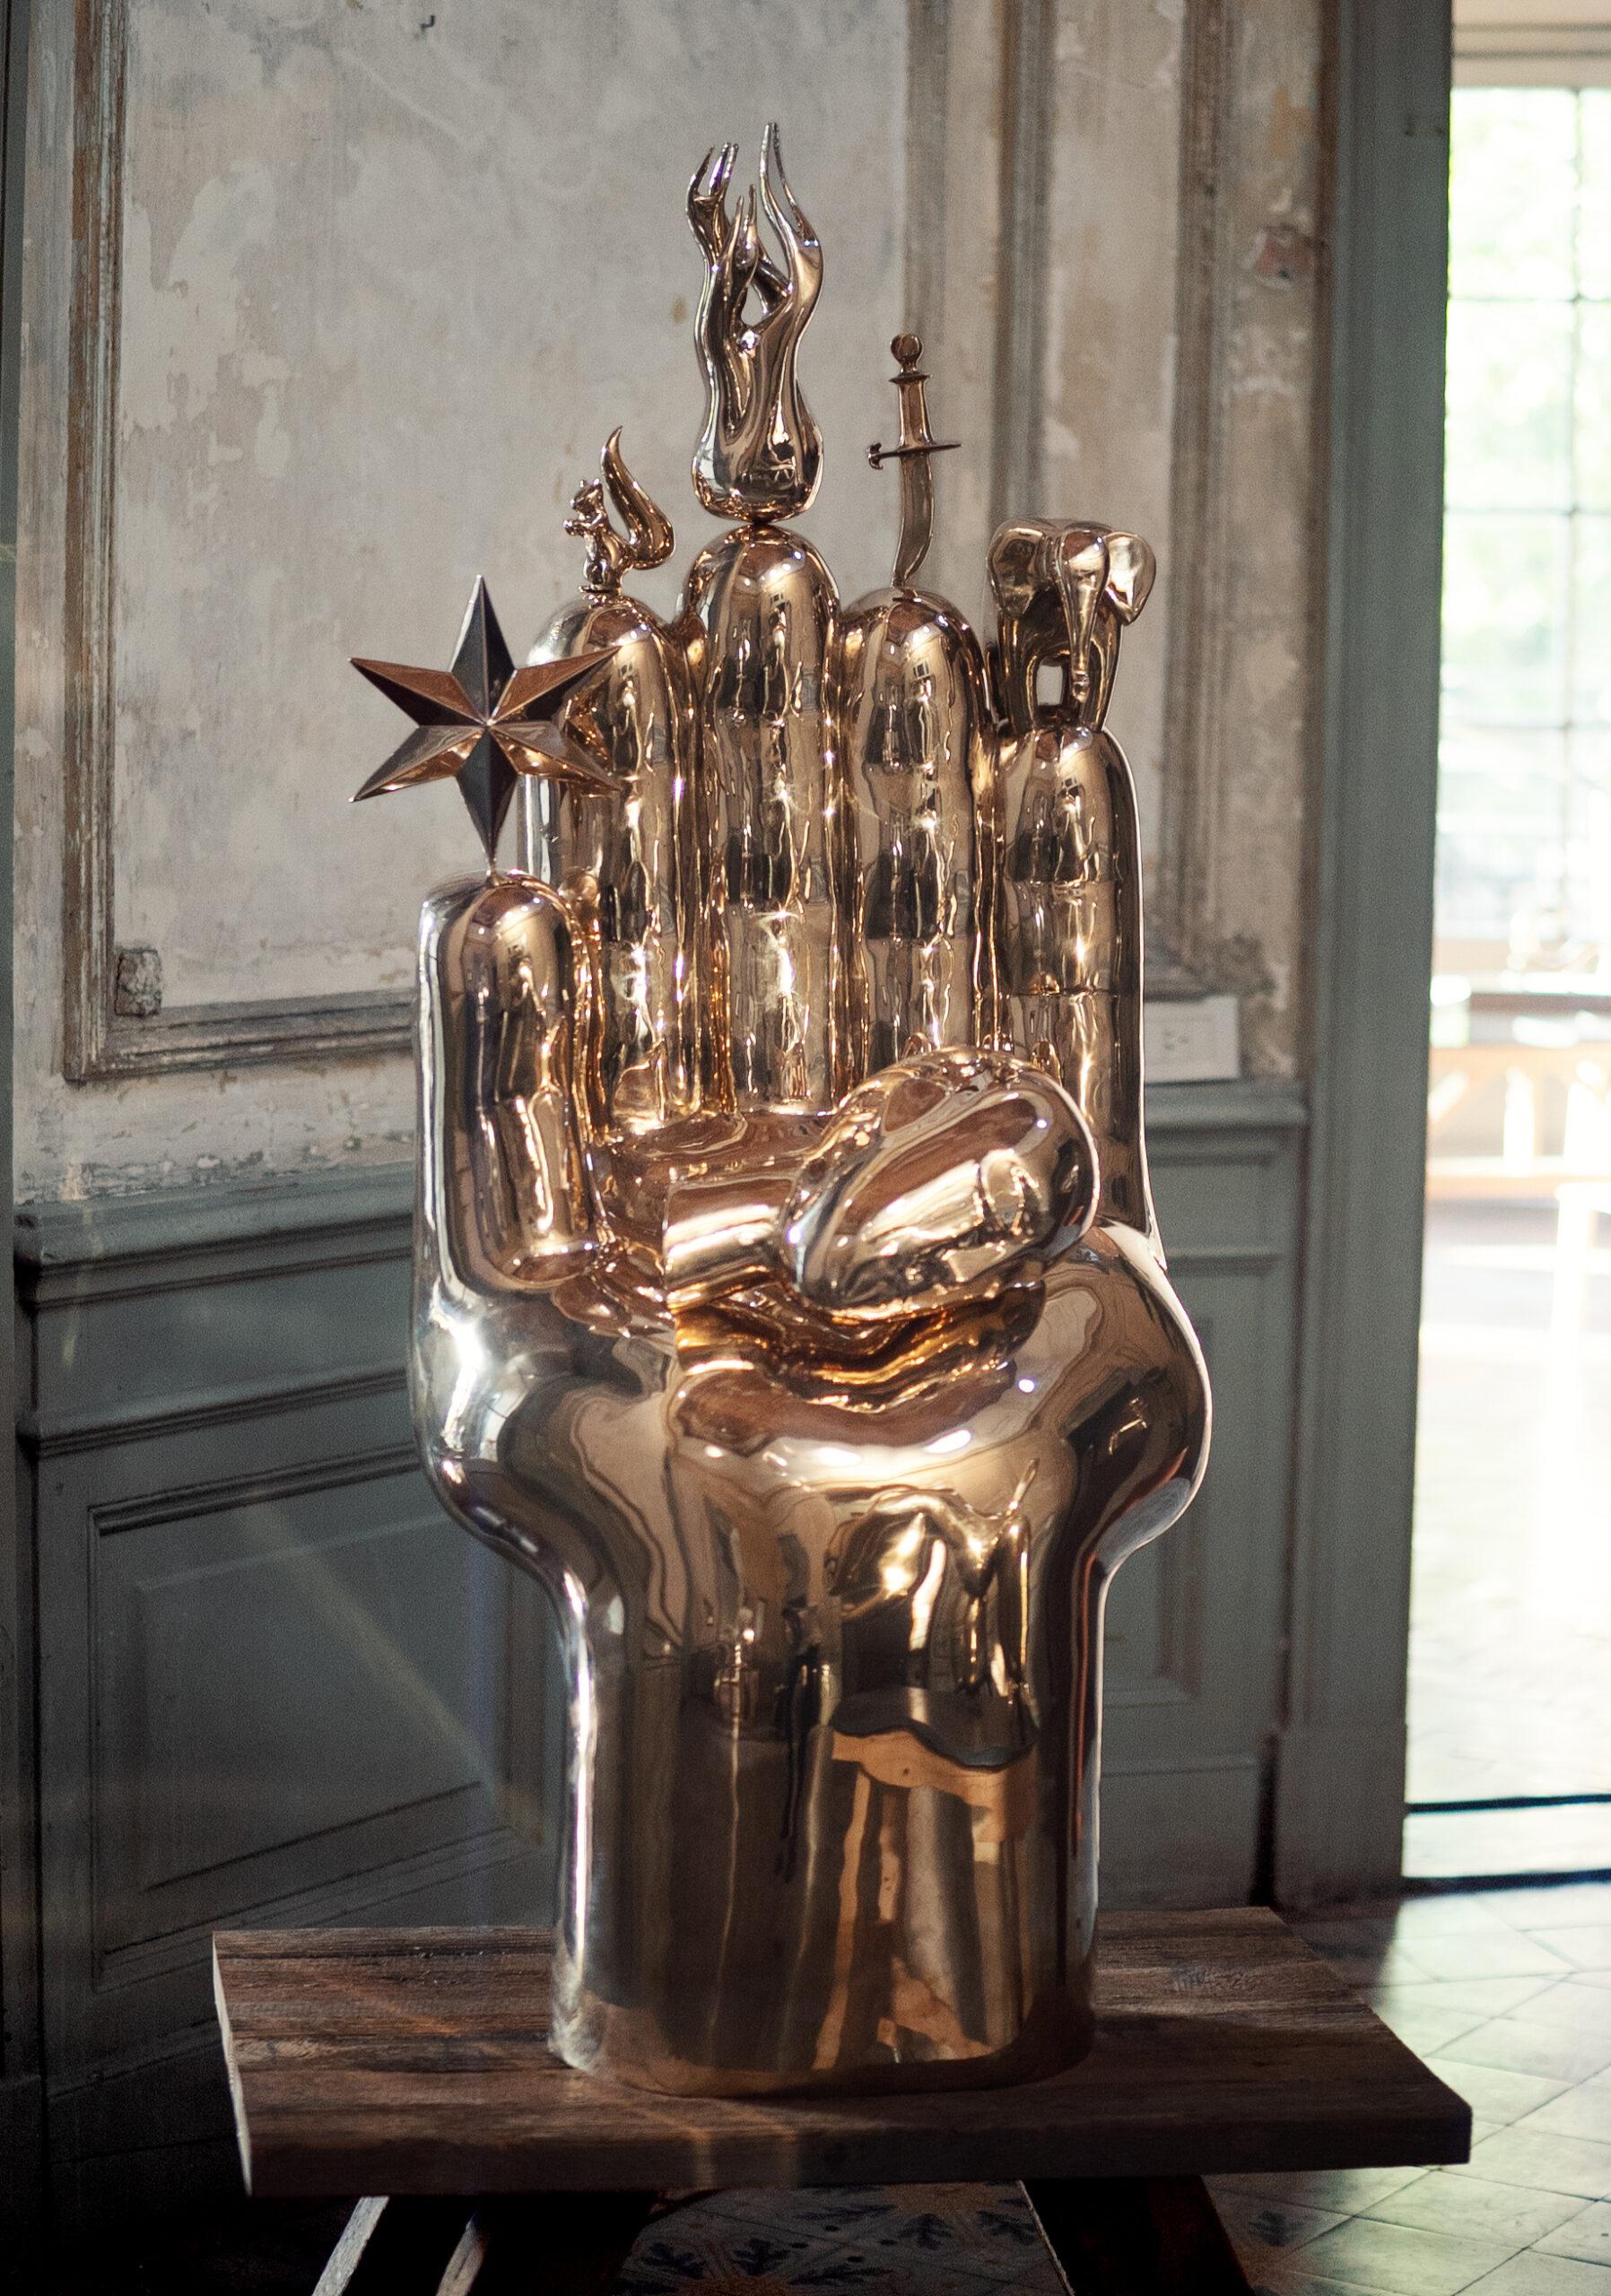 Hand is a polished bronze sculpture by contemporary artist Marcelo Martin Burgos, dimensions are 126 × 50 × 40 cm (49.6 × 19.7 × 15.7 in). 
The sculpture is signed and numbered, it is part of a limited edition of 8 editions, and comes with a